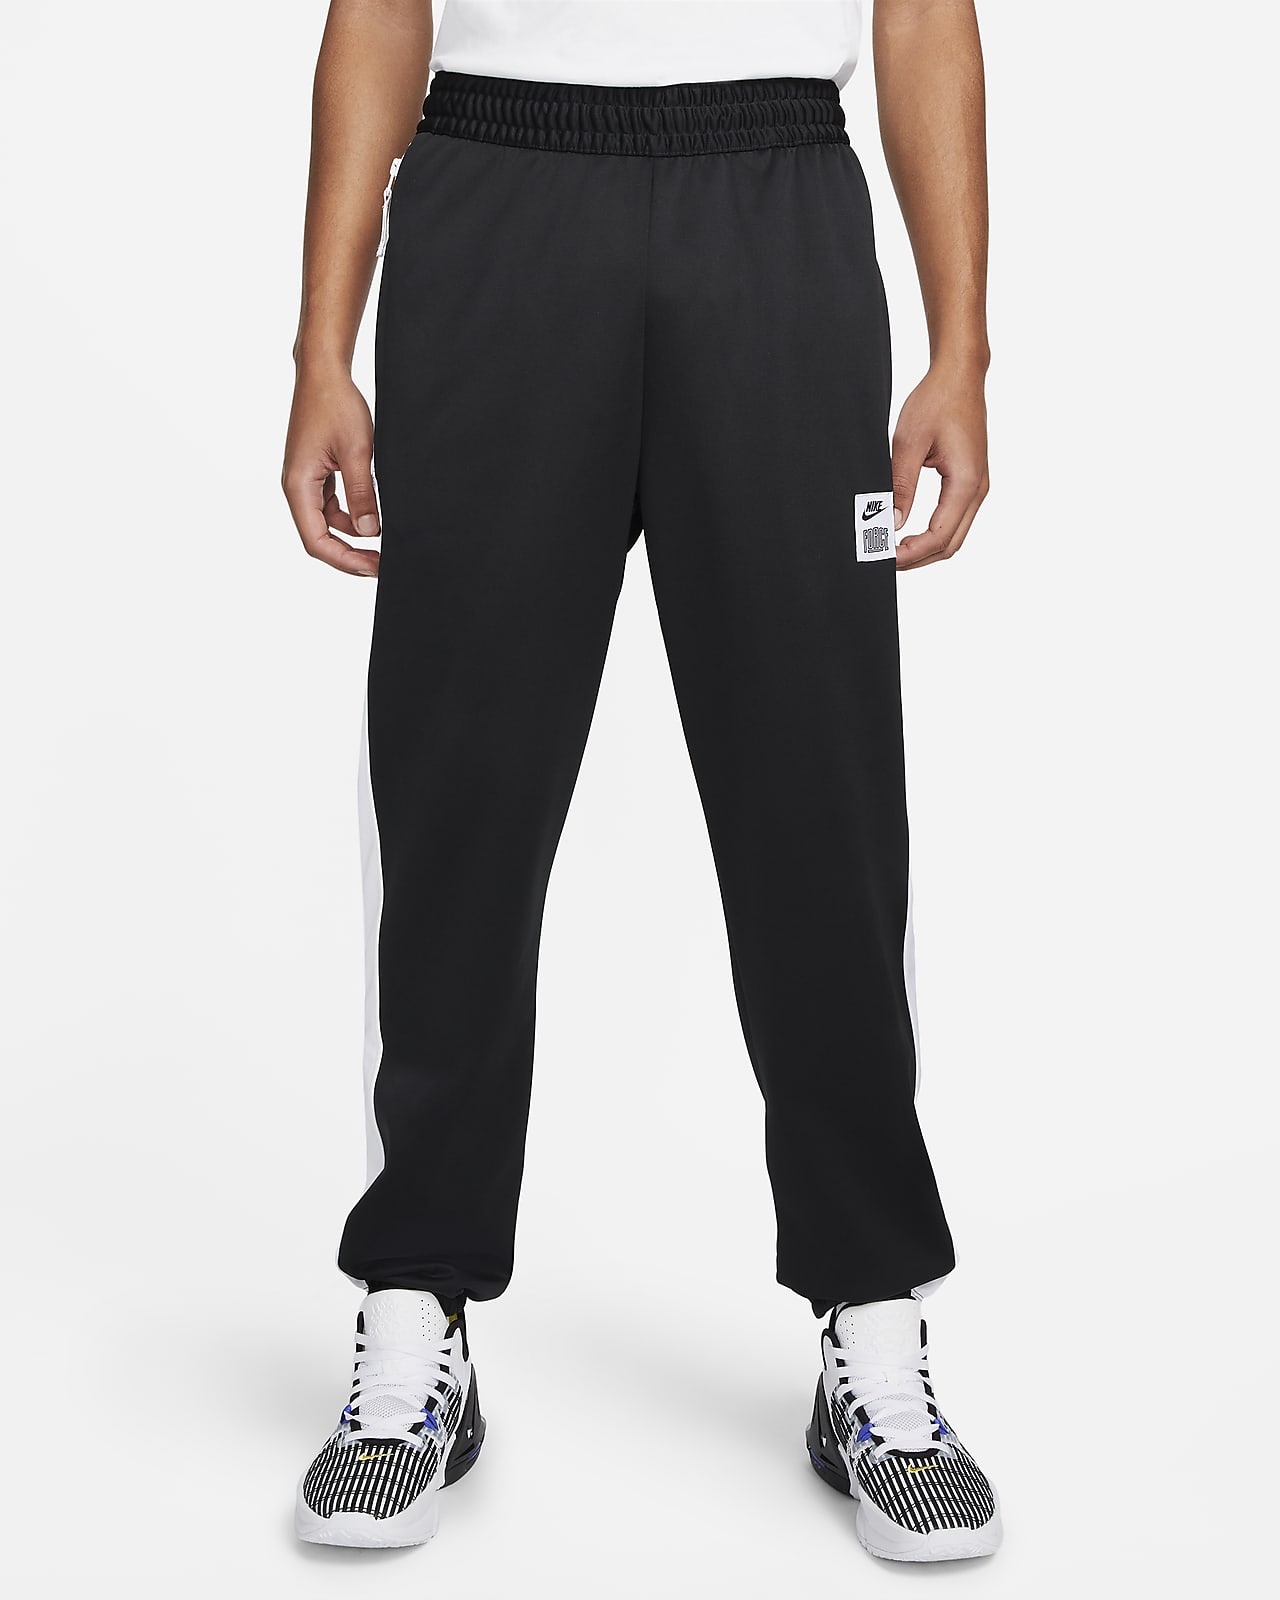 Nike Starting 5 Men's Therma-FIT Basketball Trousers